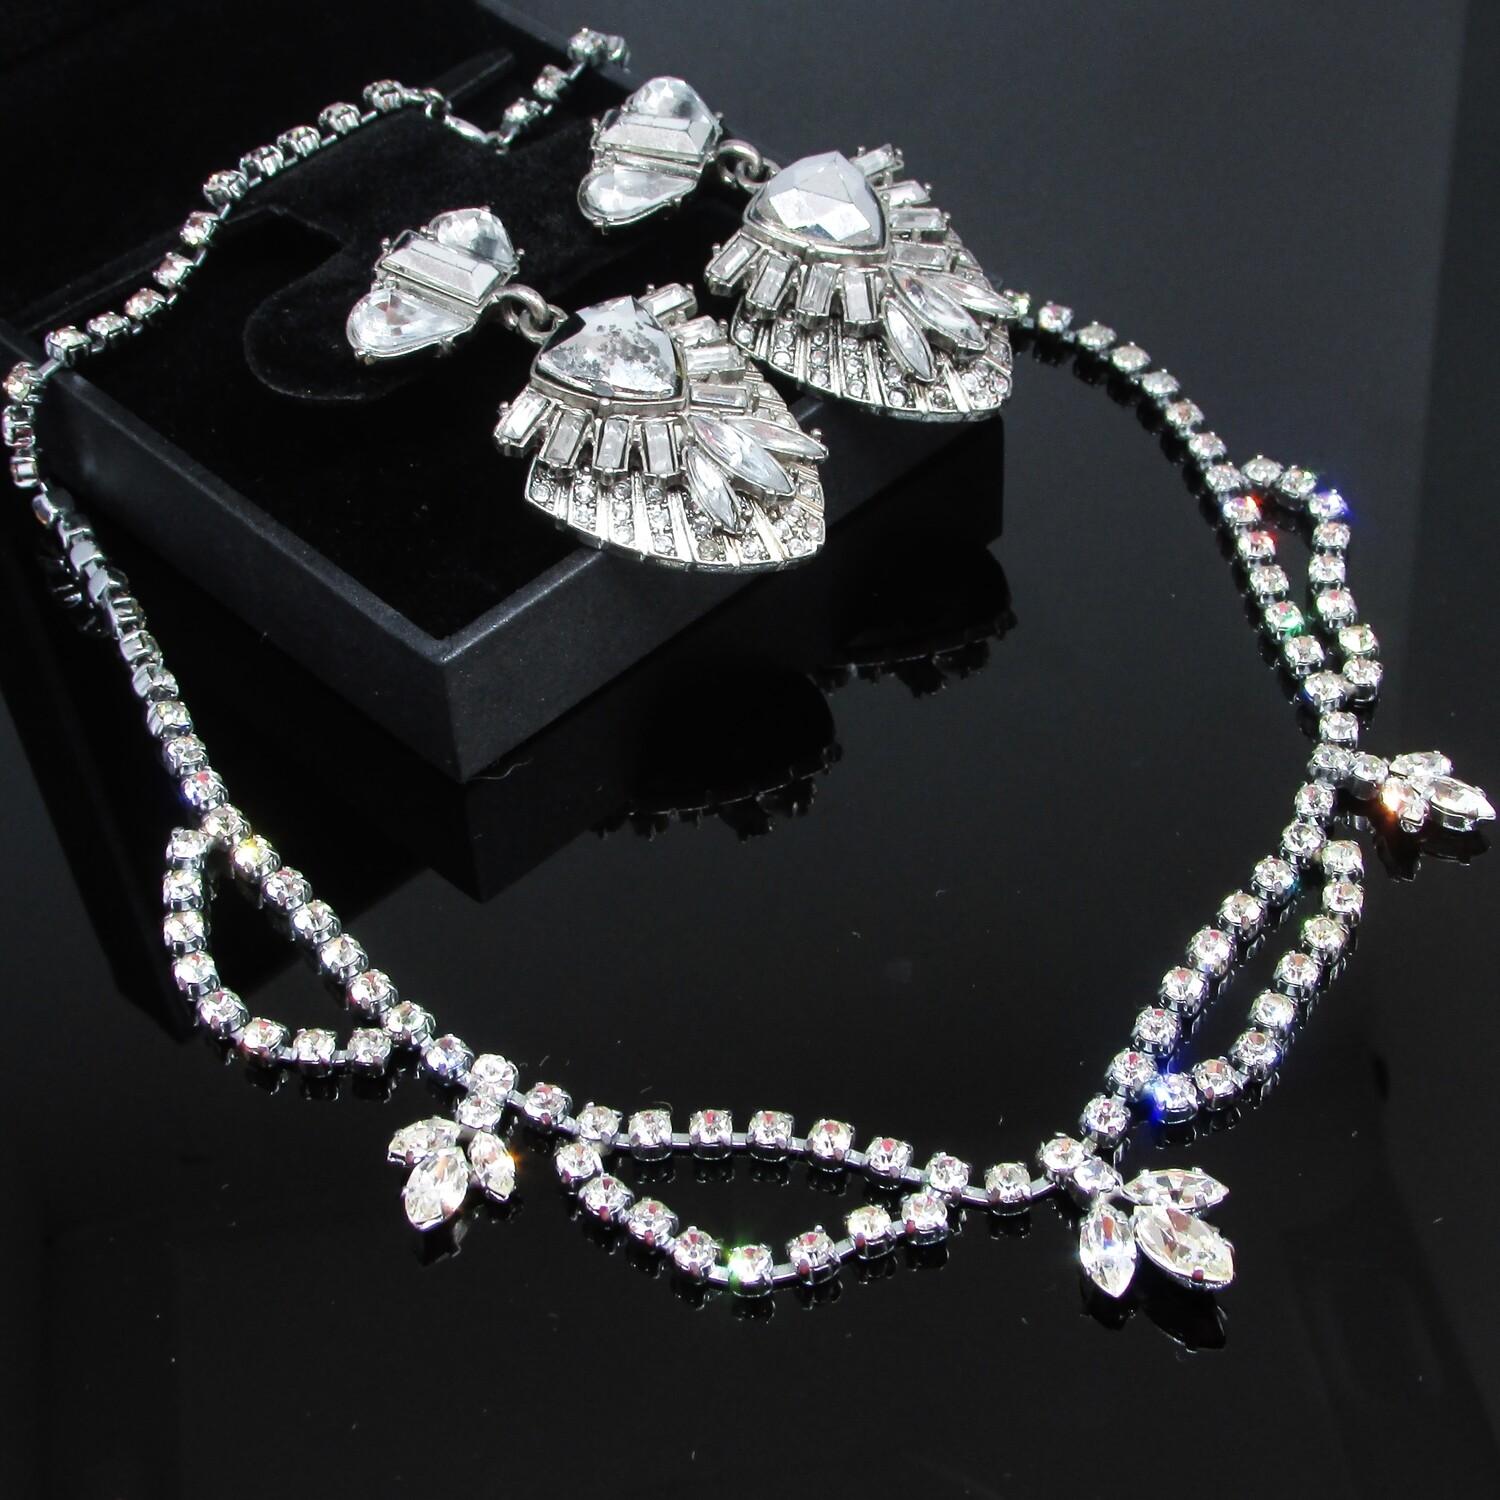 Marquis Cut Floral Filigree Diamante Crystal Necklace and Art Deco Earrings c. 1970's